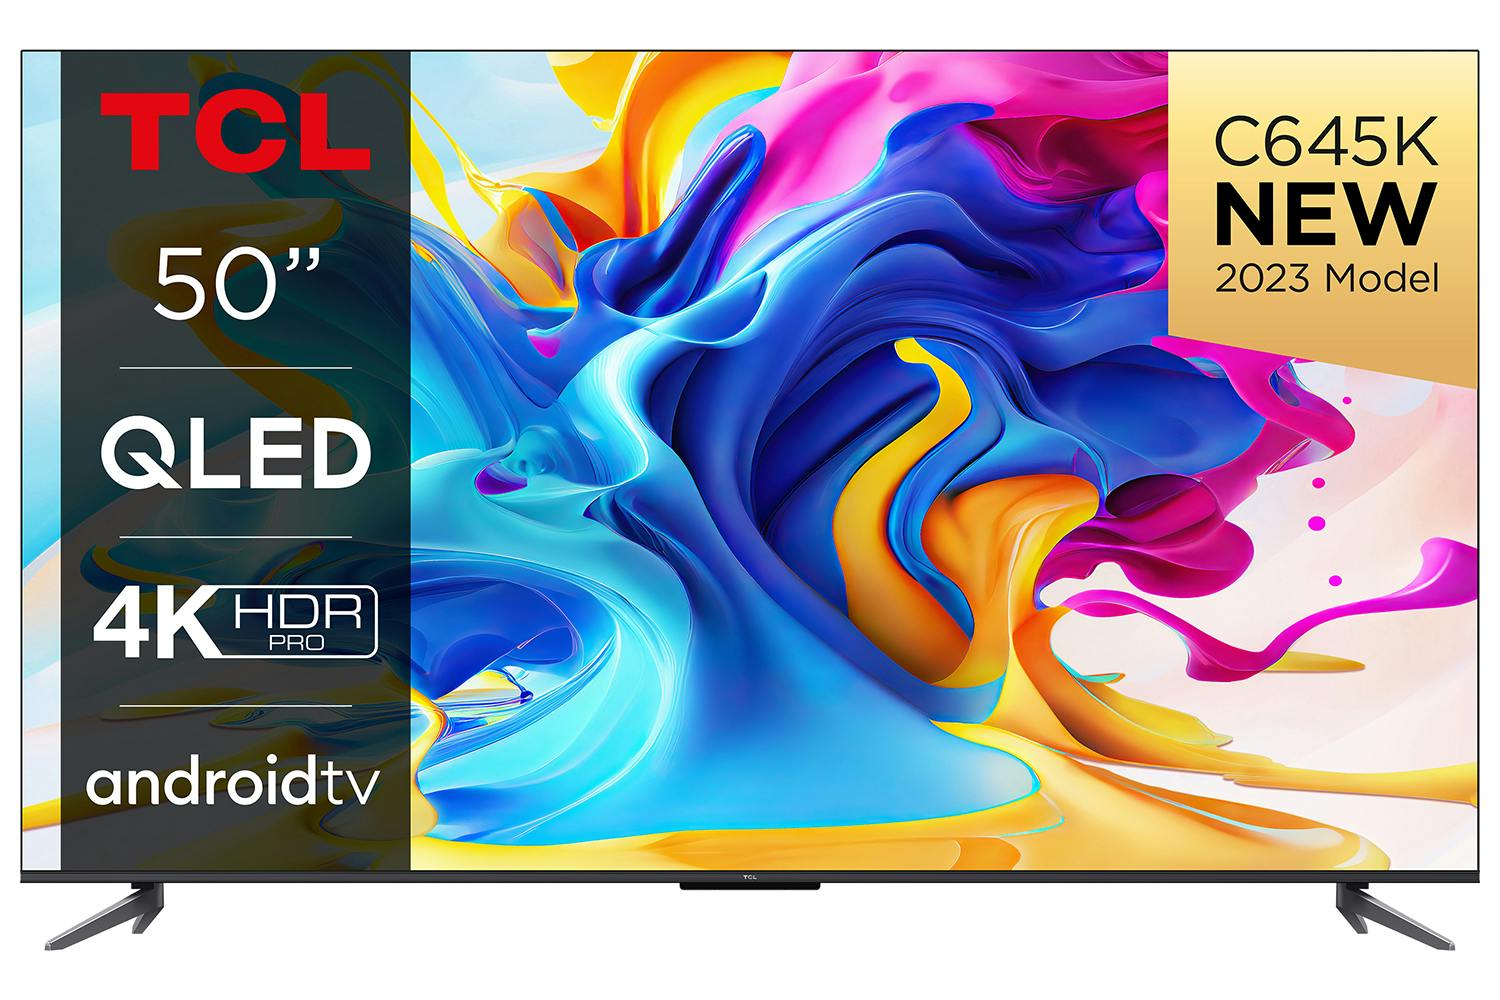 TCL 50" 4K QLED Android Smart TV | 50C645K